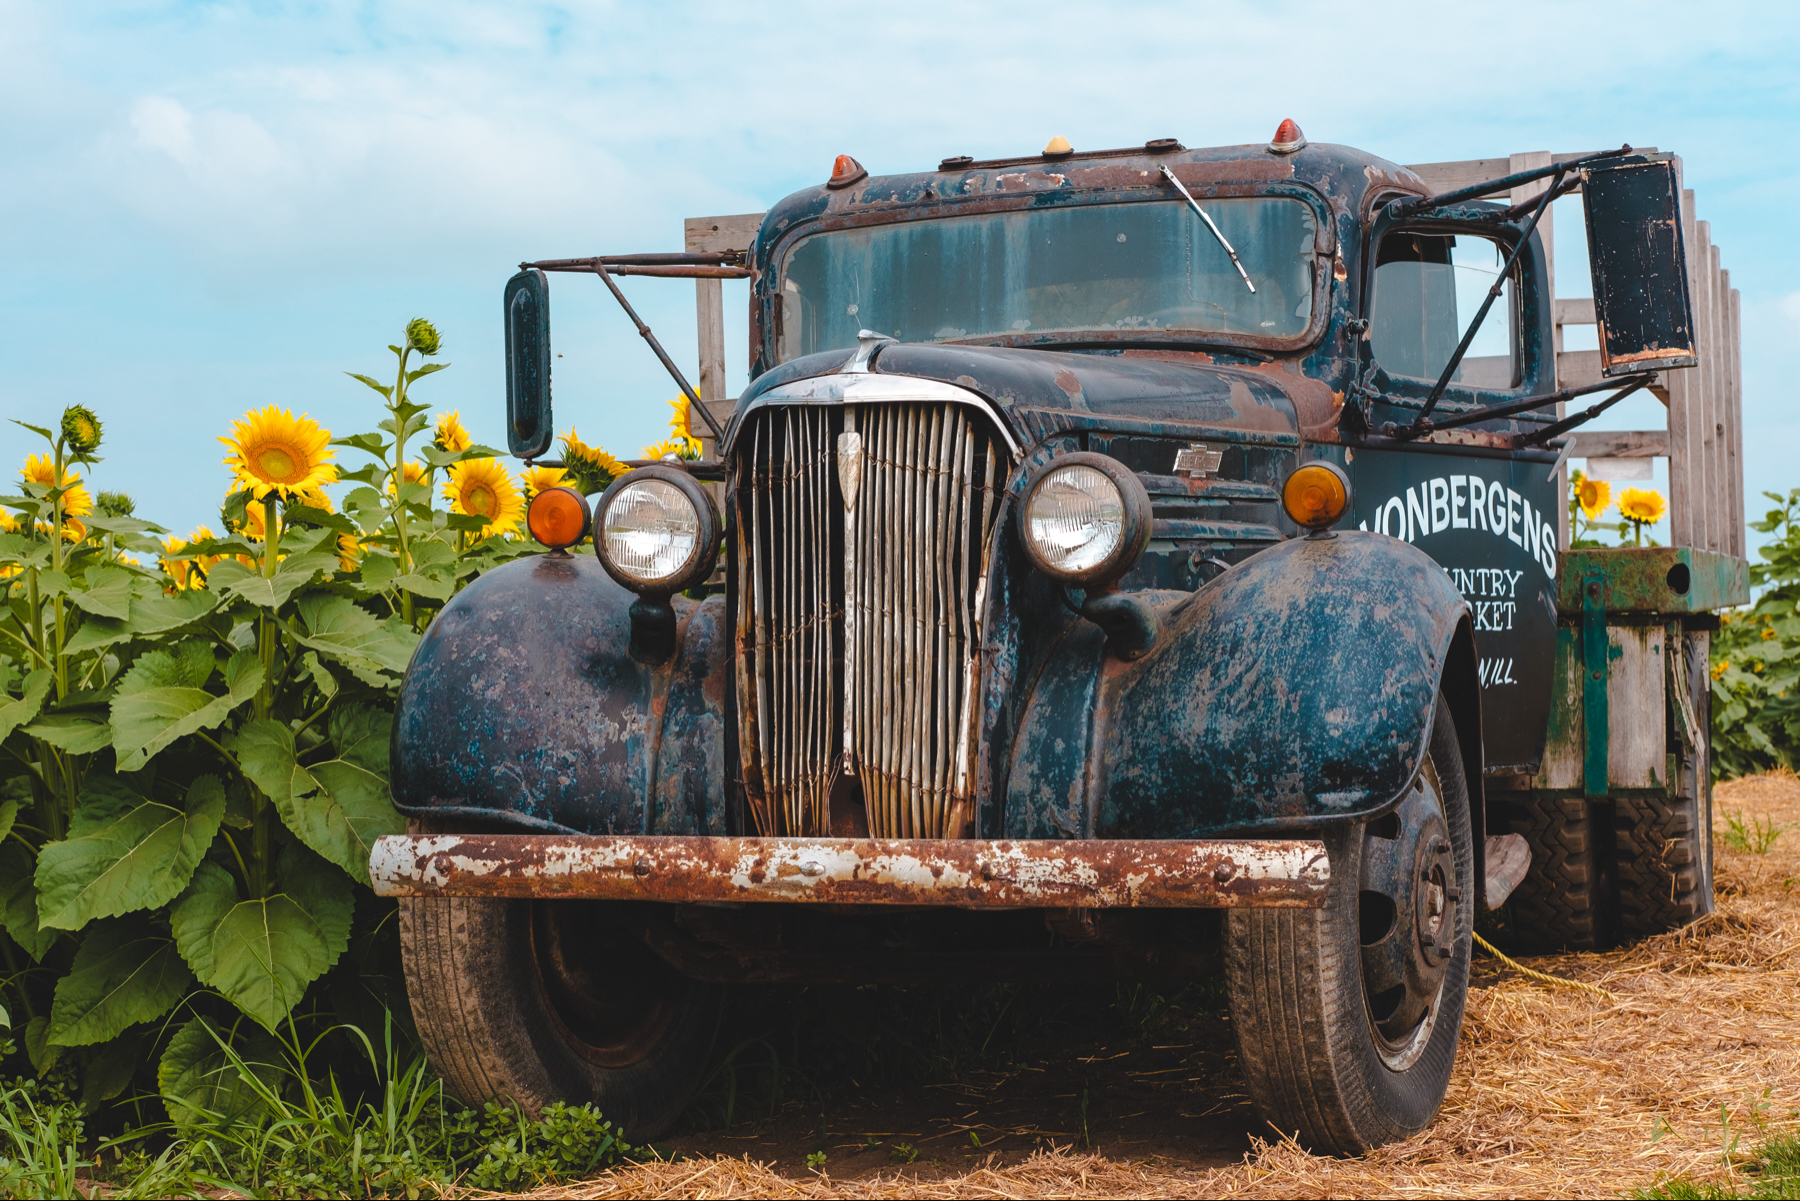 An old, rusted truck with a wooden flatbed parked in front of a field of sunflowers.